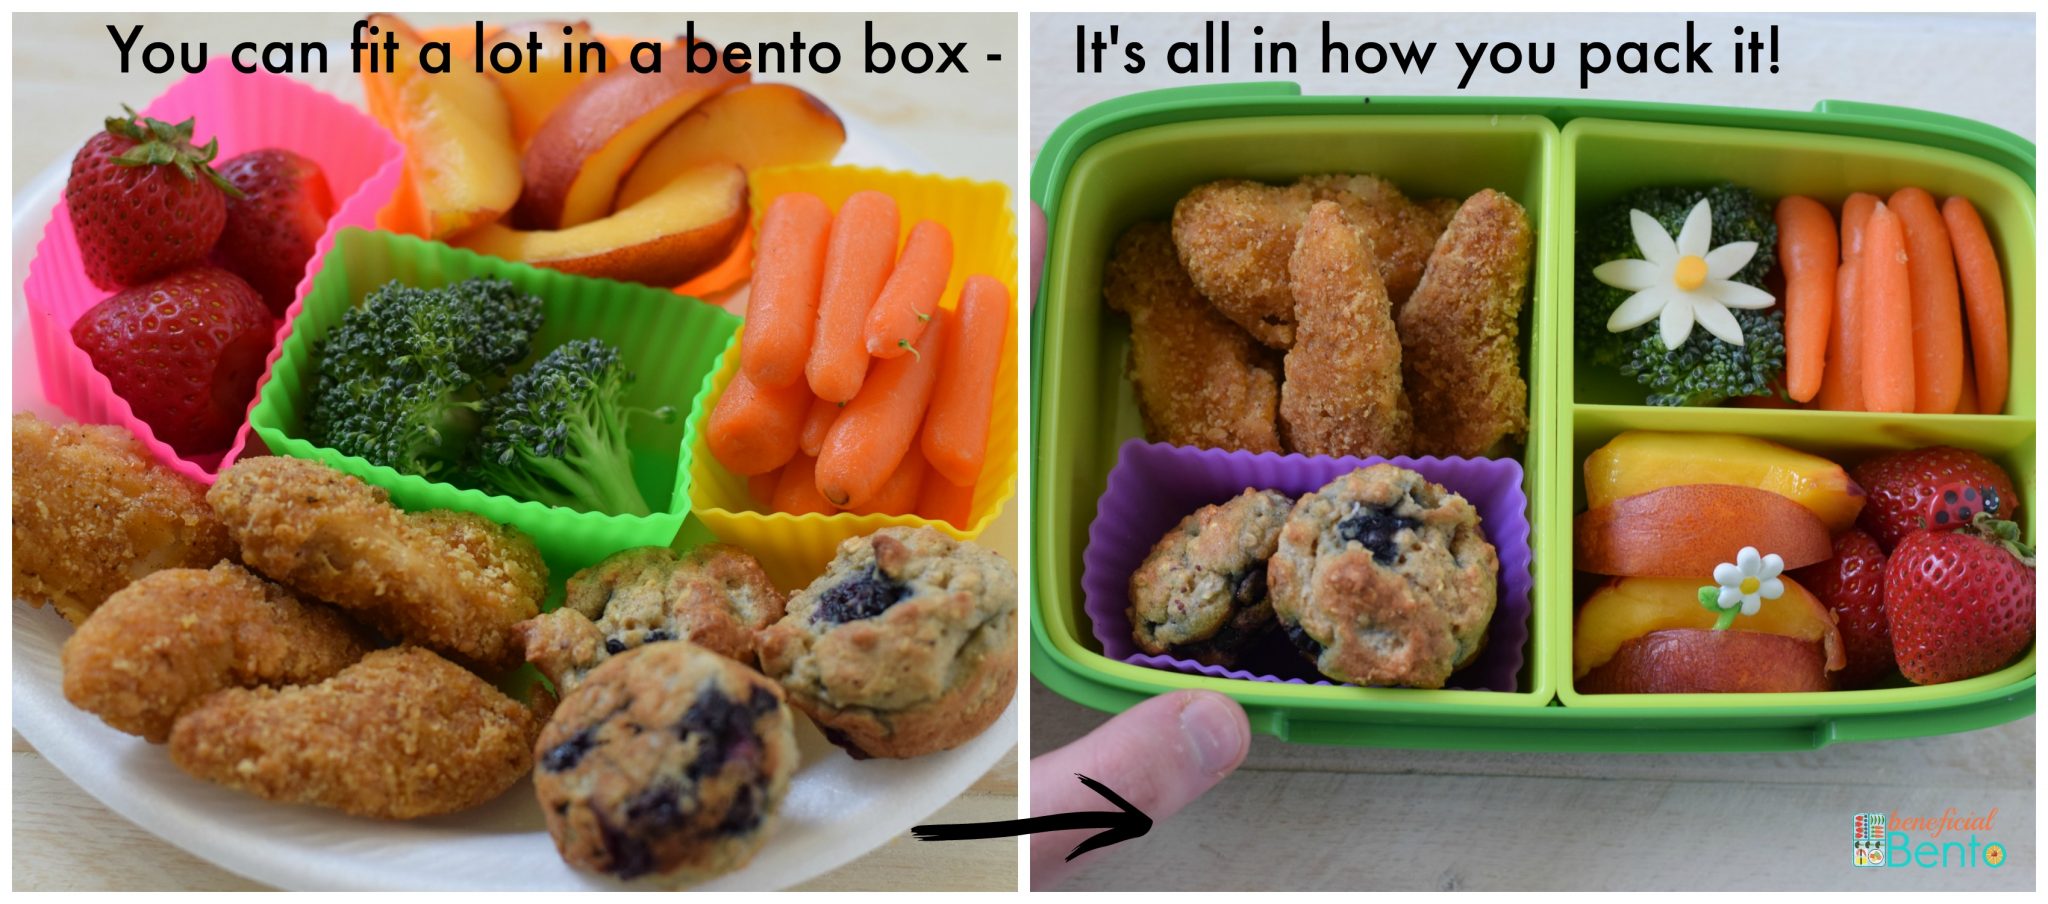 https://static.beneficial-bento.com/uploads/2017/06/How-to-pack-a-lot-of-food-in-a-bento-box.jpg